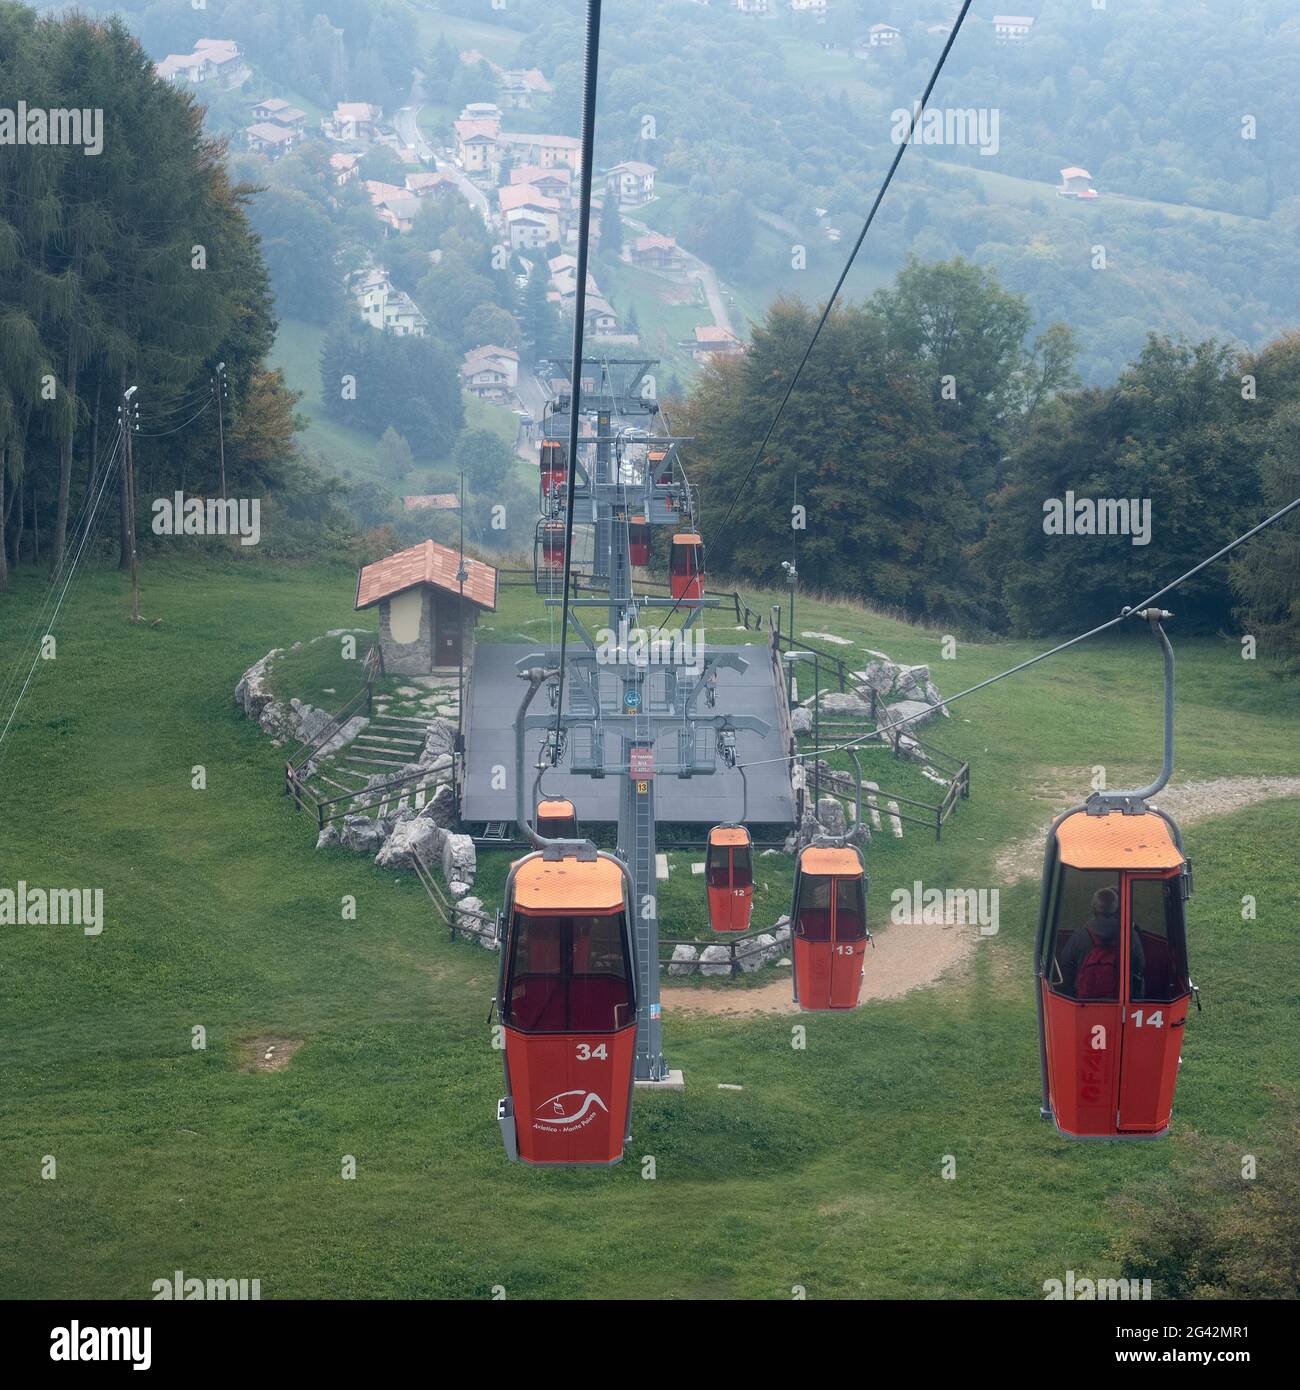 MONTE POIETO, LOMBARDY/ITALY - OCTOBER 6 : Cable car up to Monte Poieto Lombardy Italy on October 6, 2019. One unidentified pers Stock Photo